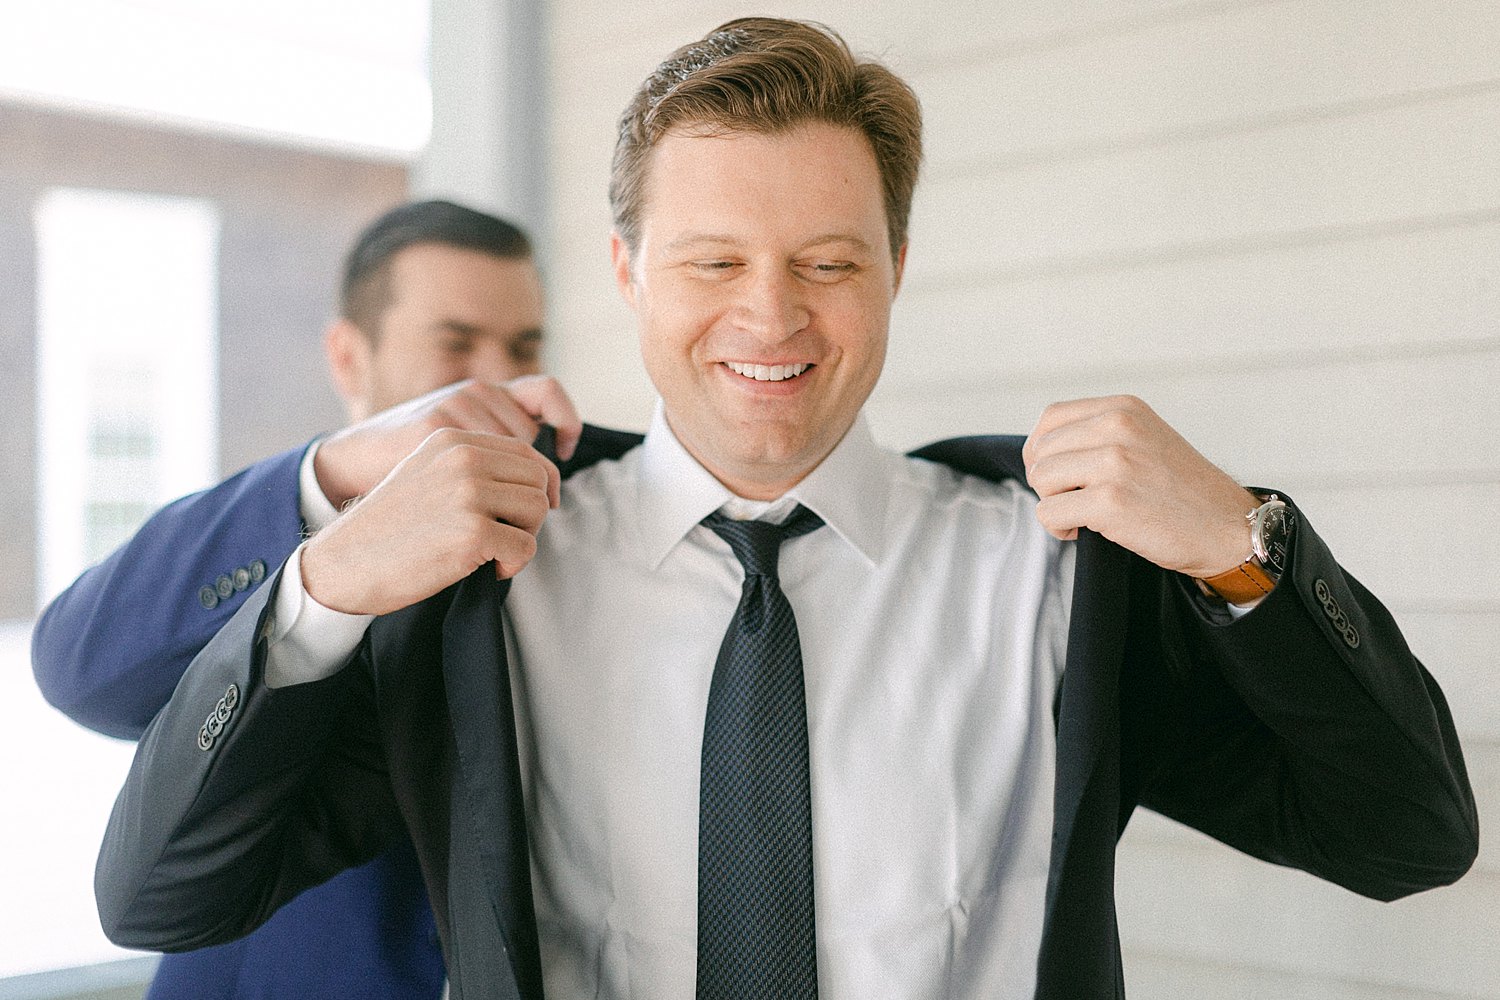 brother helping groom put on suit jacket smiling